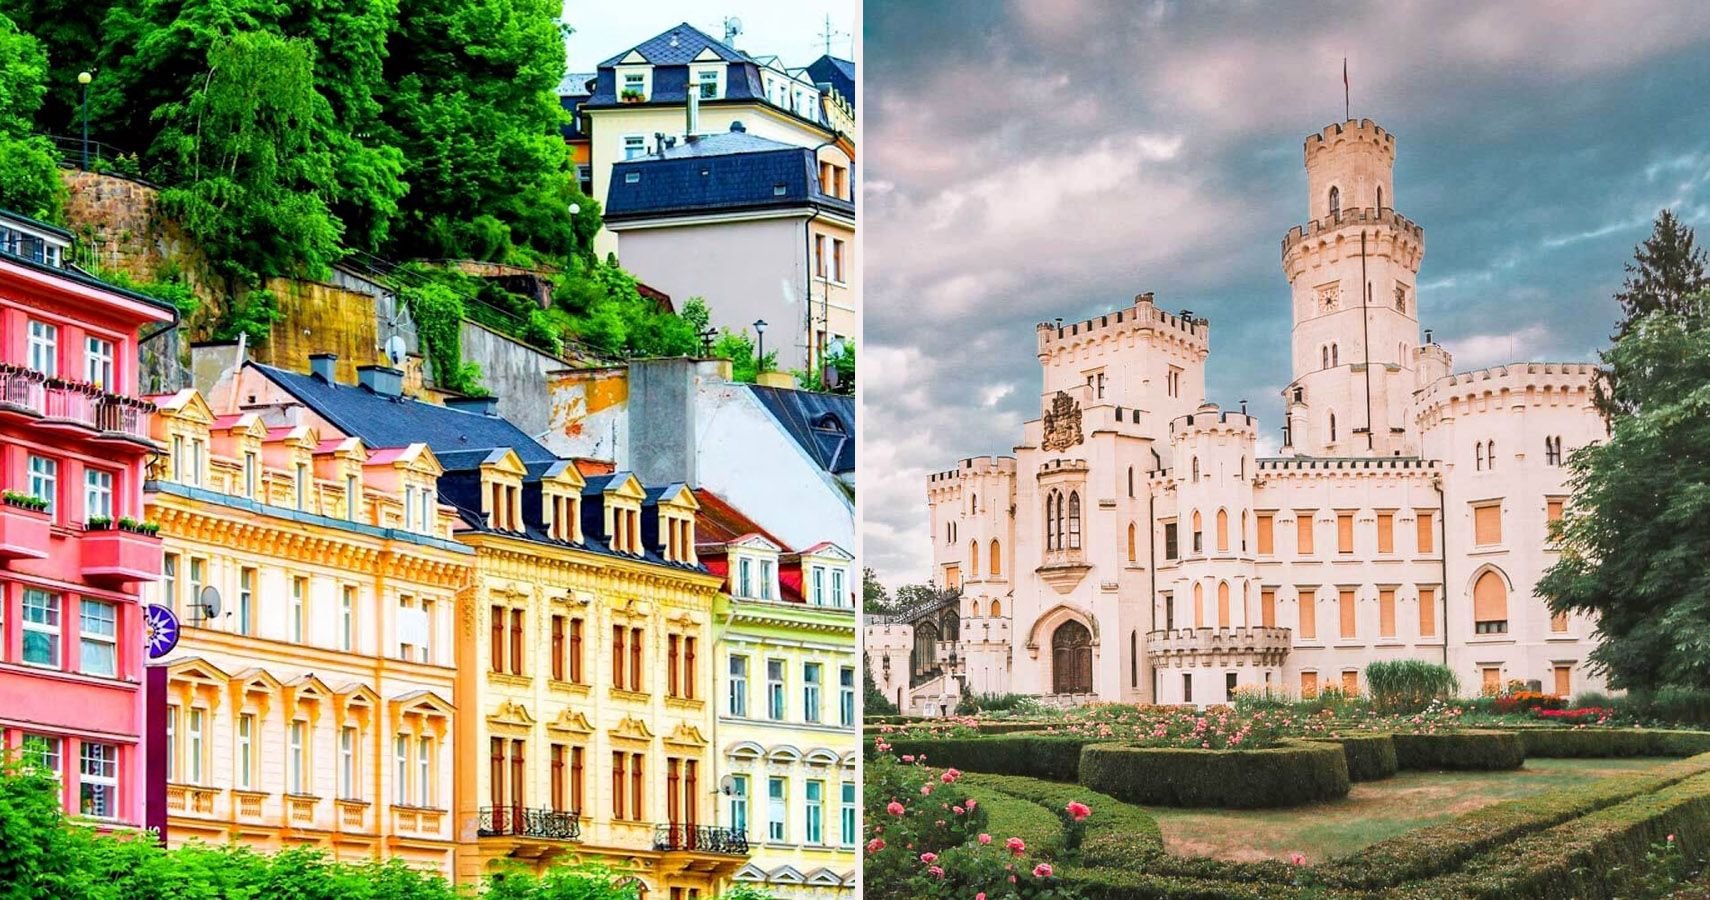 10 Reasons Why The Czech Republic Should Be On Your Bucket List